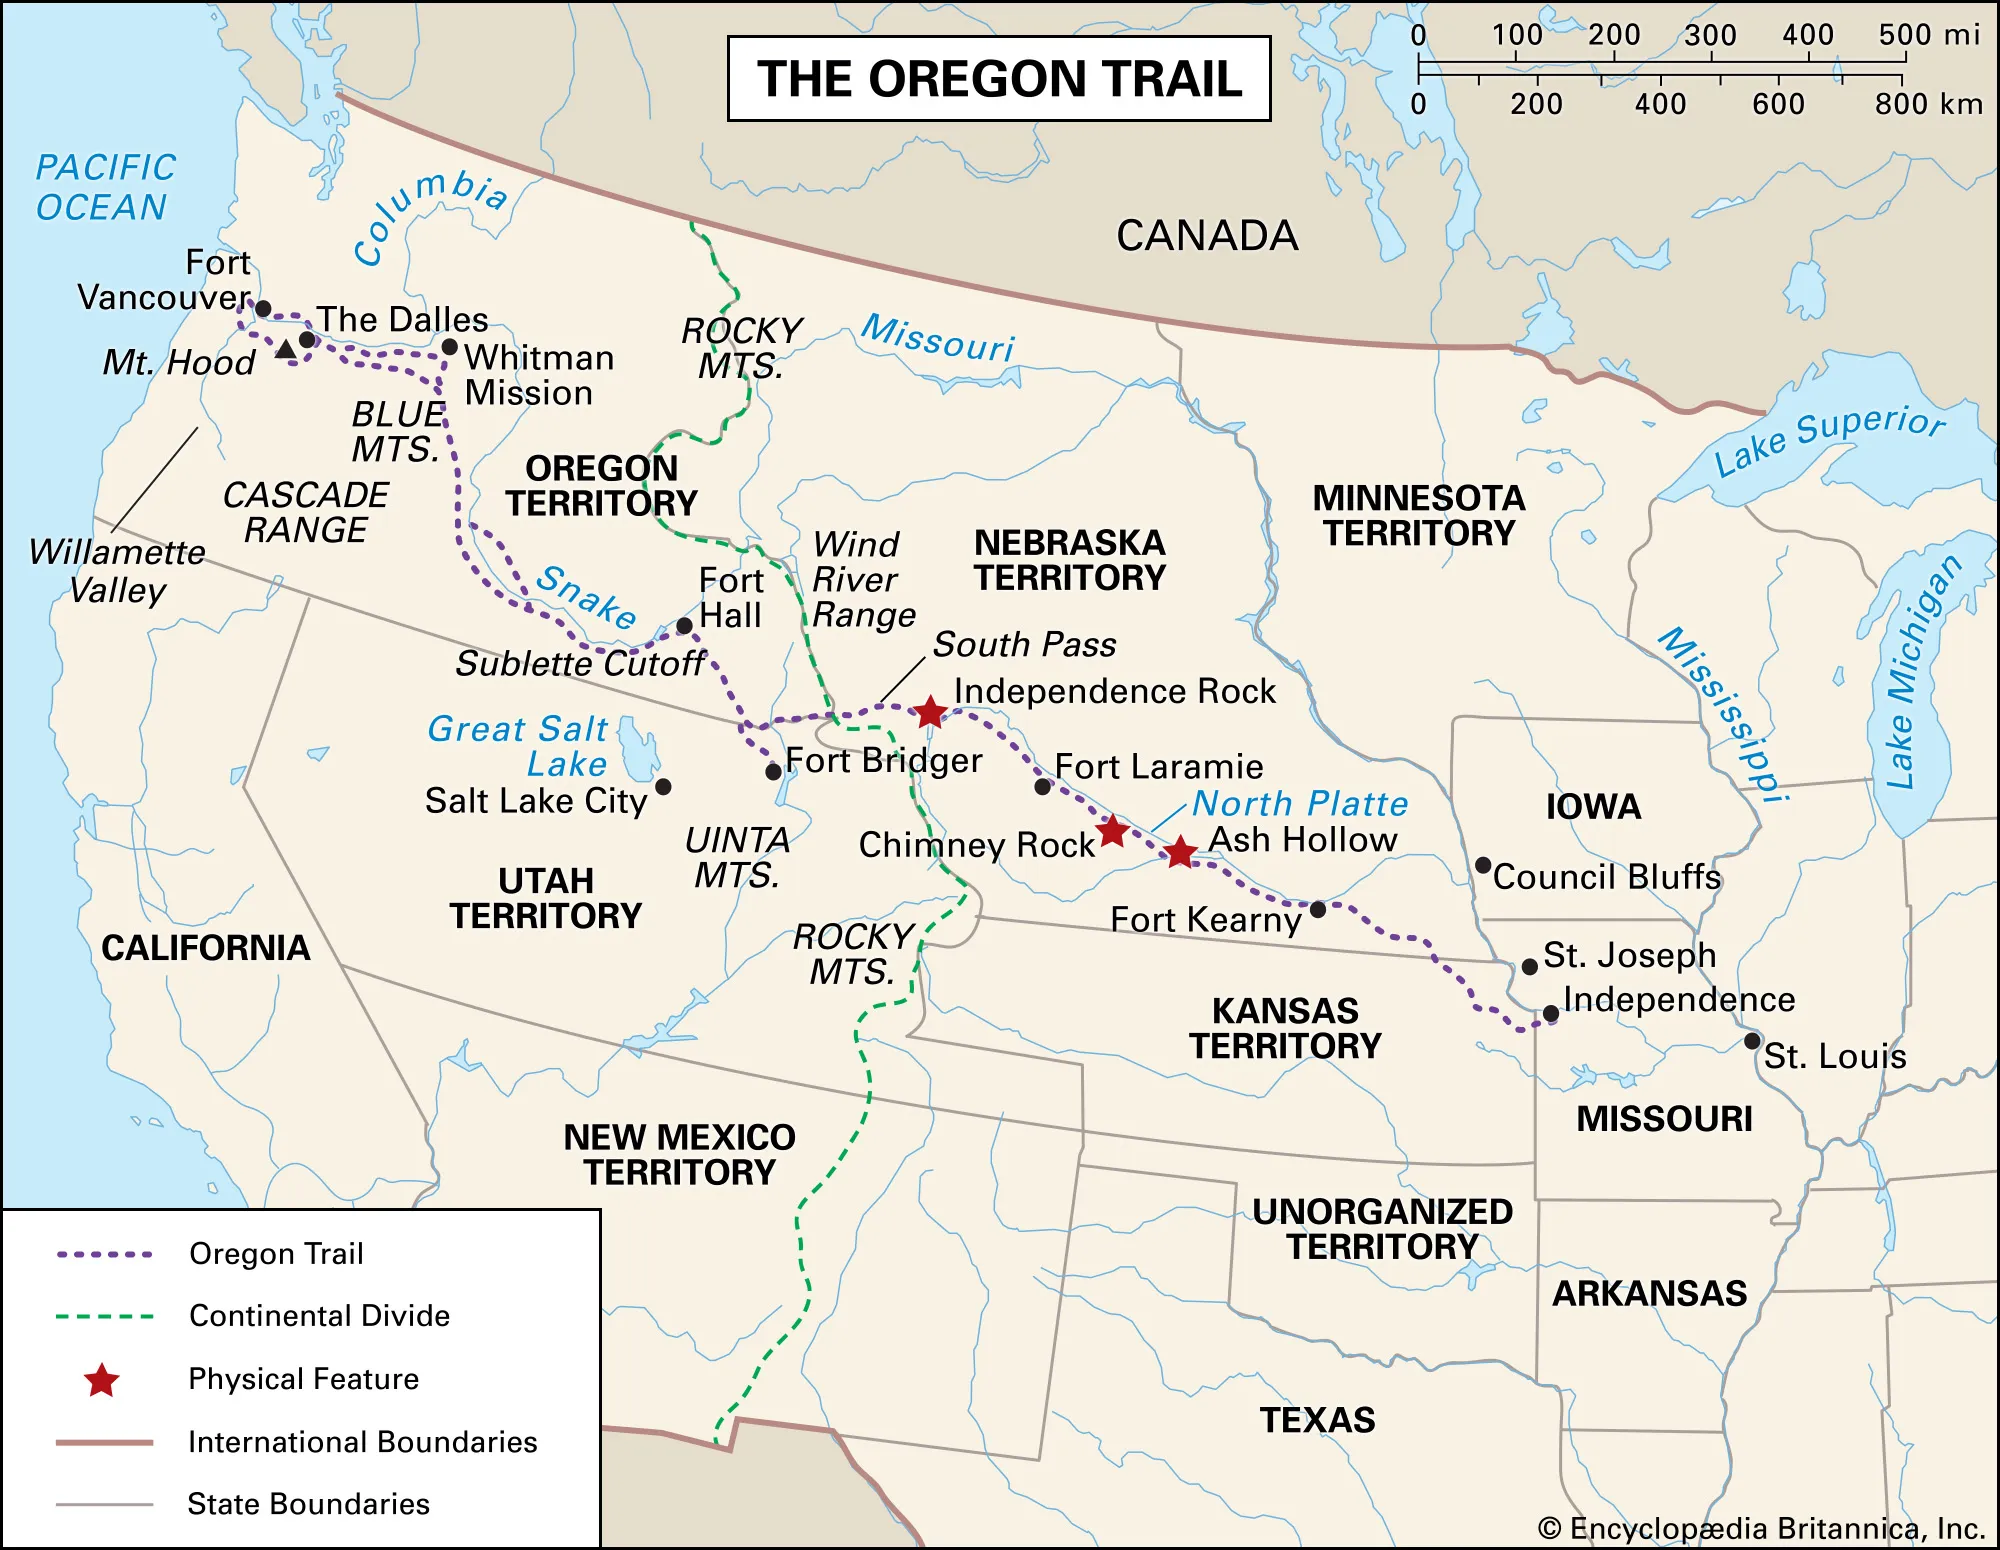 The Oregon Trail depicted on a map of the United States of America